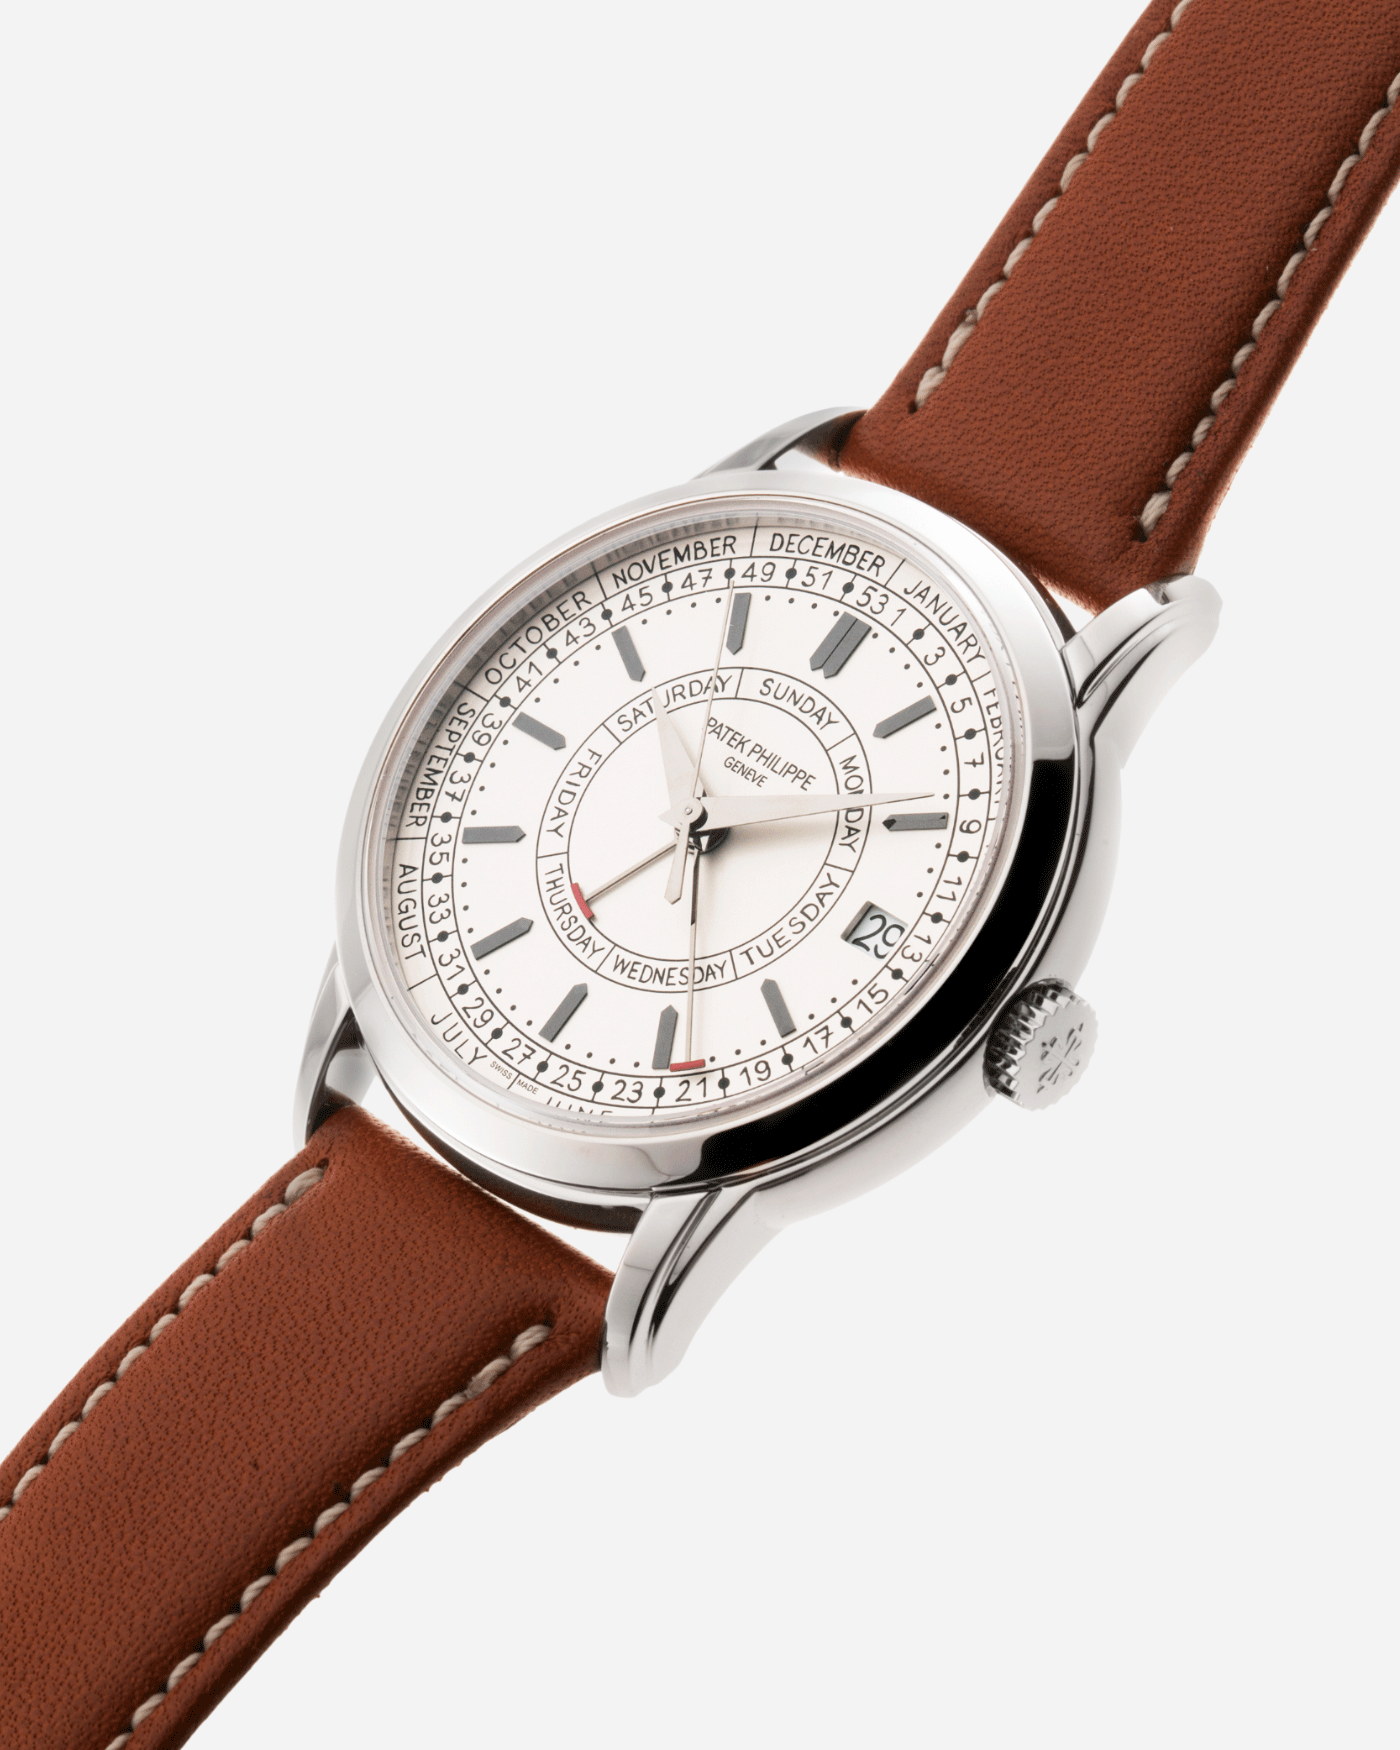 Brand: Patek Philippe Year: 2019 Model: Calatrava Weekly Calendar Reference Number: 5212A Material: Stainless Steel Movement: In-House Caliber 26 330 S C J SE Case Diameter: 40mm Bracelet: Patek Philippe Chestnut Brown Calfskin and Stainless Steel Tang Buckle